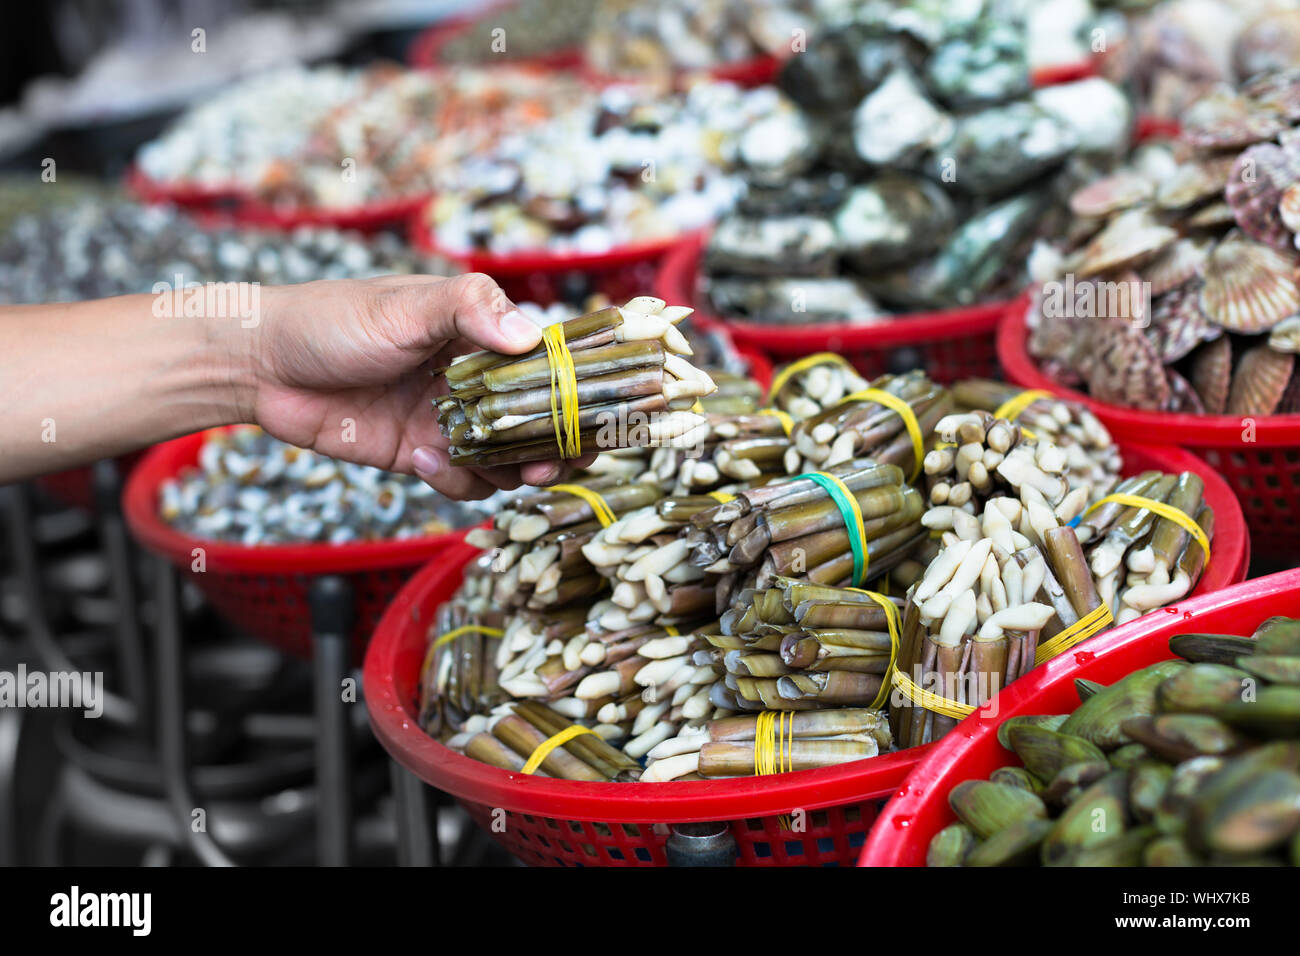 Fresh seafood catch for sale at the seafood streetmarket. Imported and local produce in crates/buckets. Stock Photo